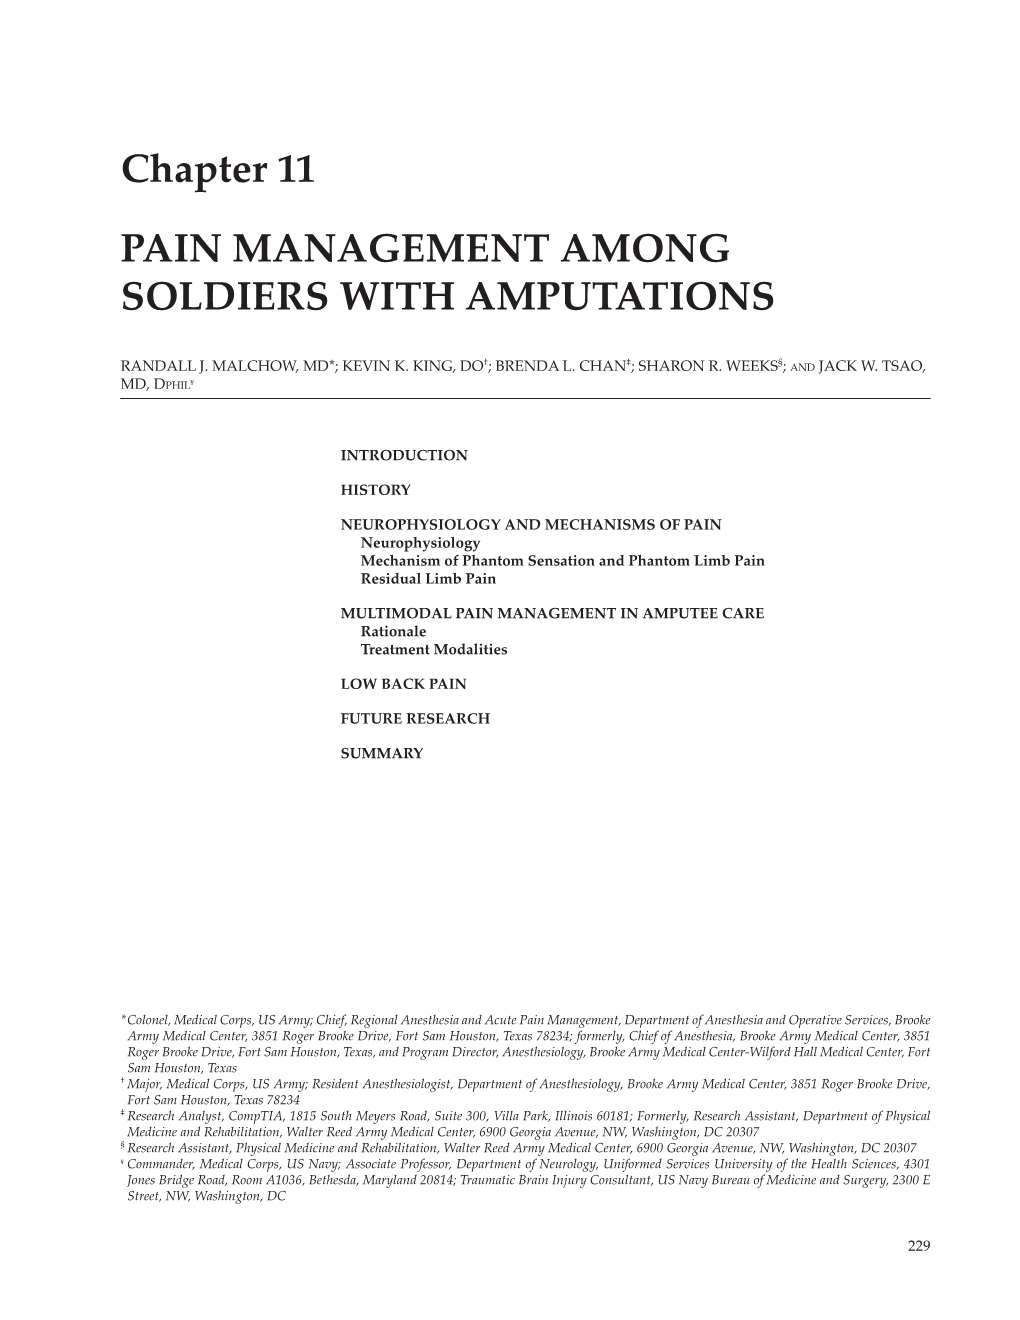 Chapter 11 PAIN MANAGEMENT AMONG SOLDIERS with AMPUTATIONS